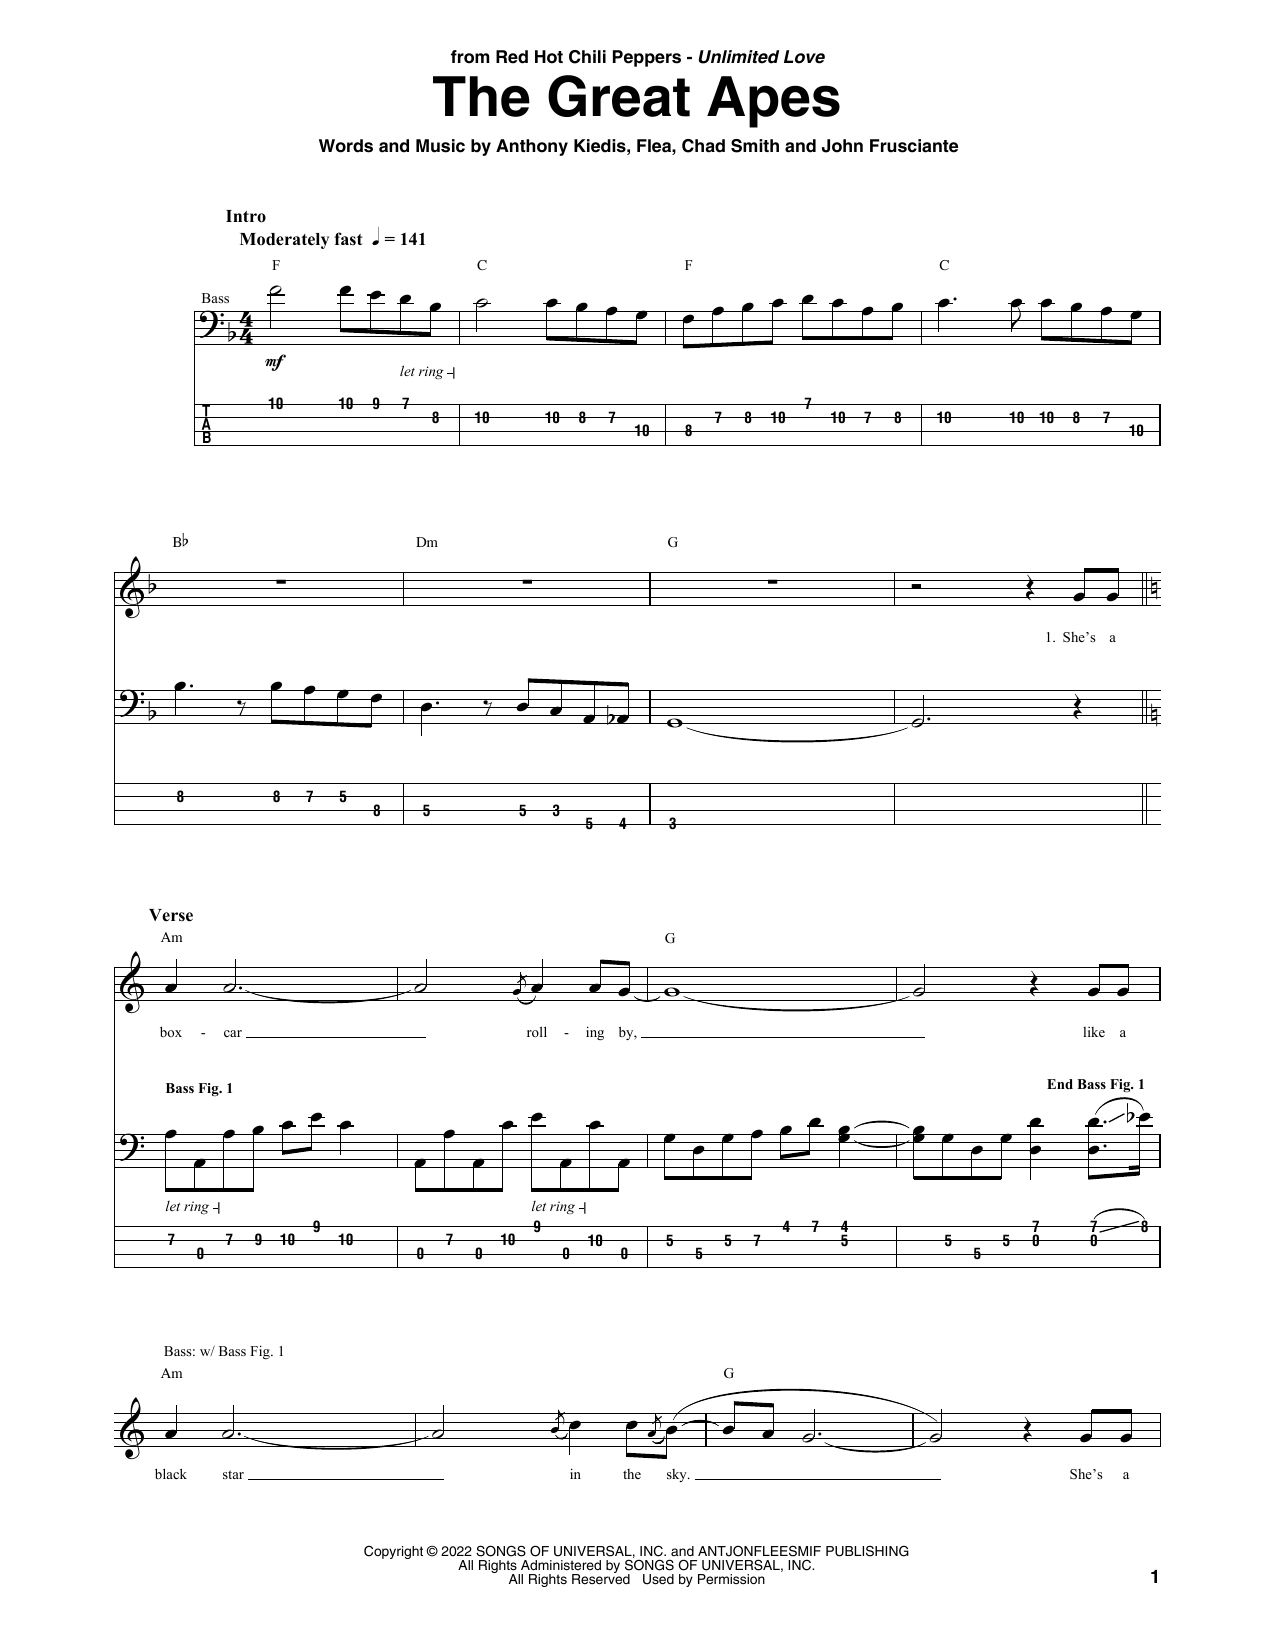 Download Red Hot Chili Peppers The Great Apes Sheet Music